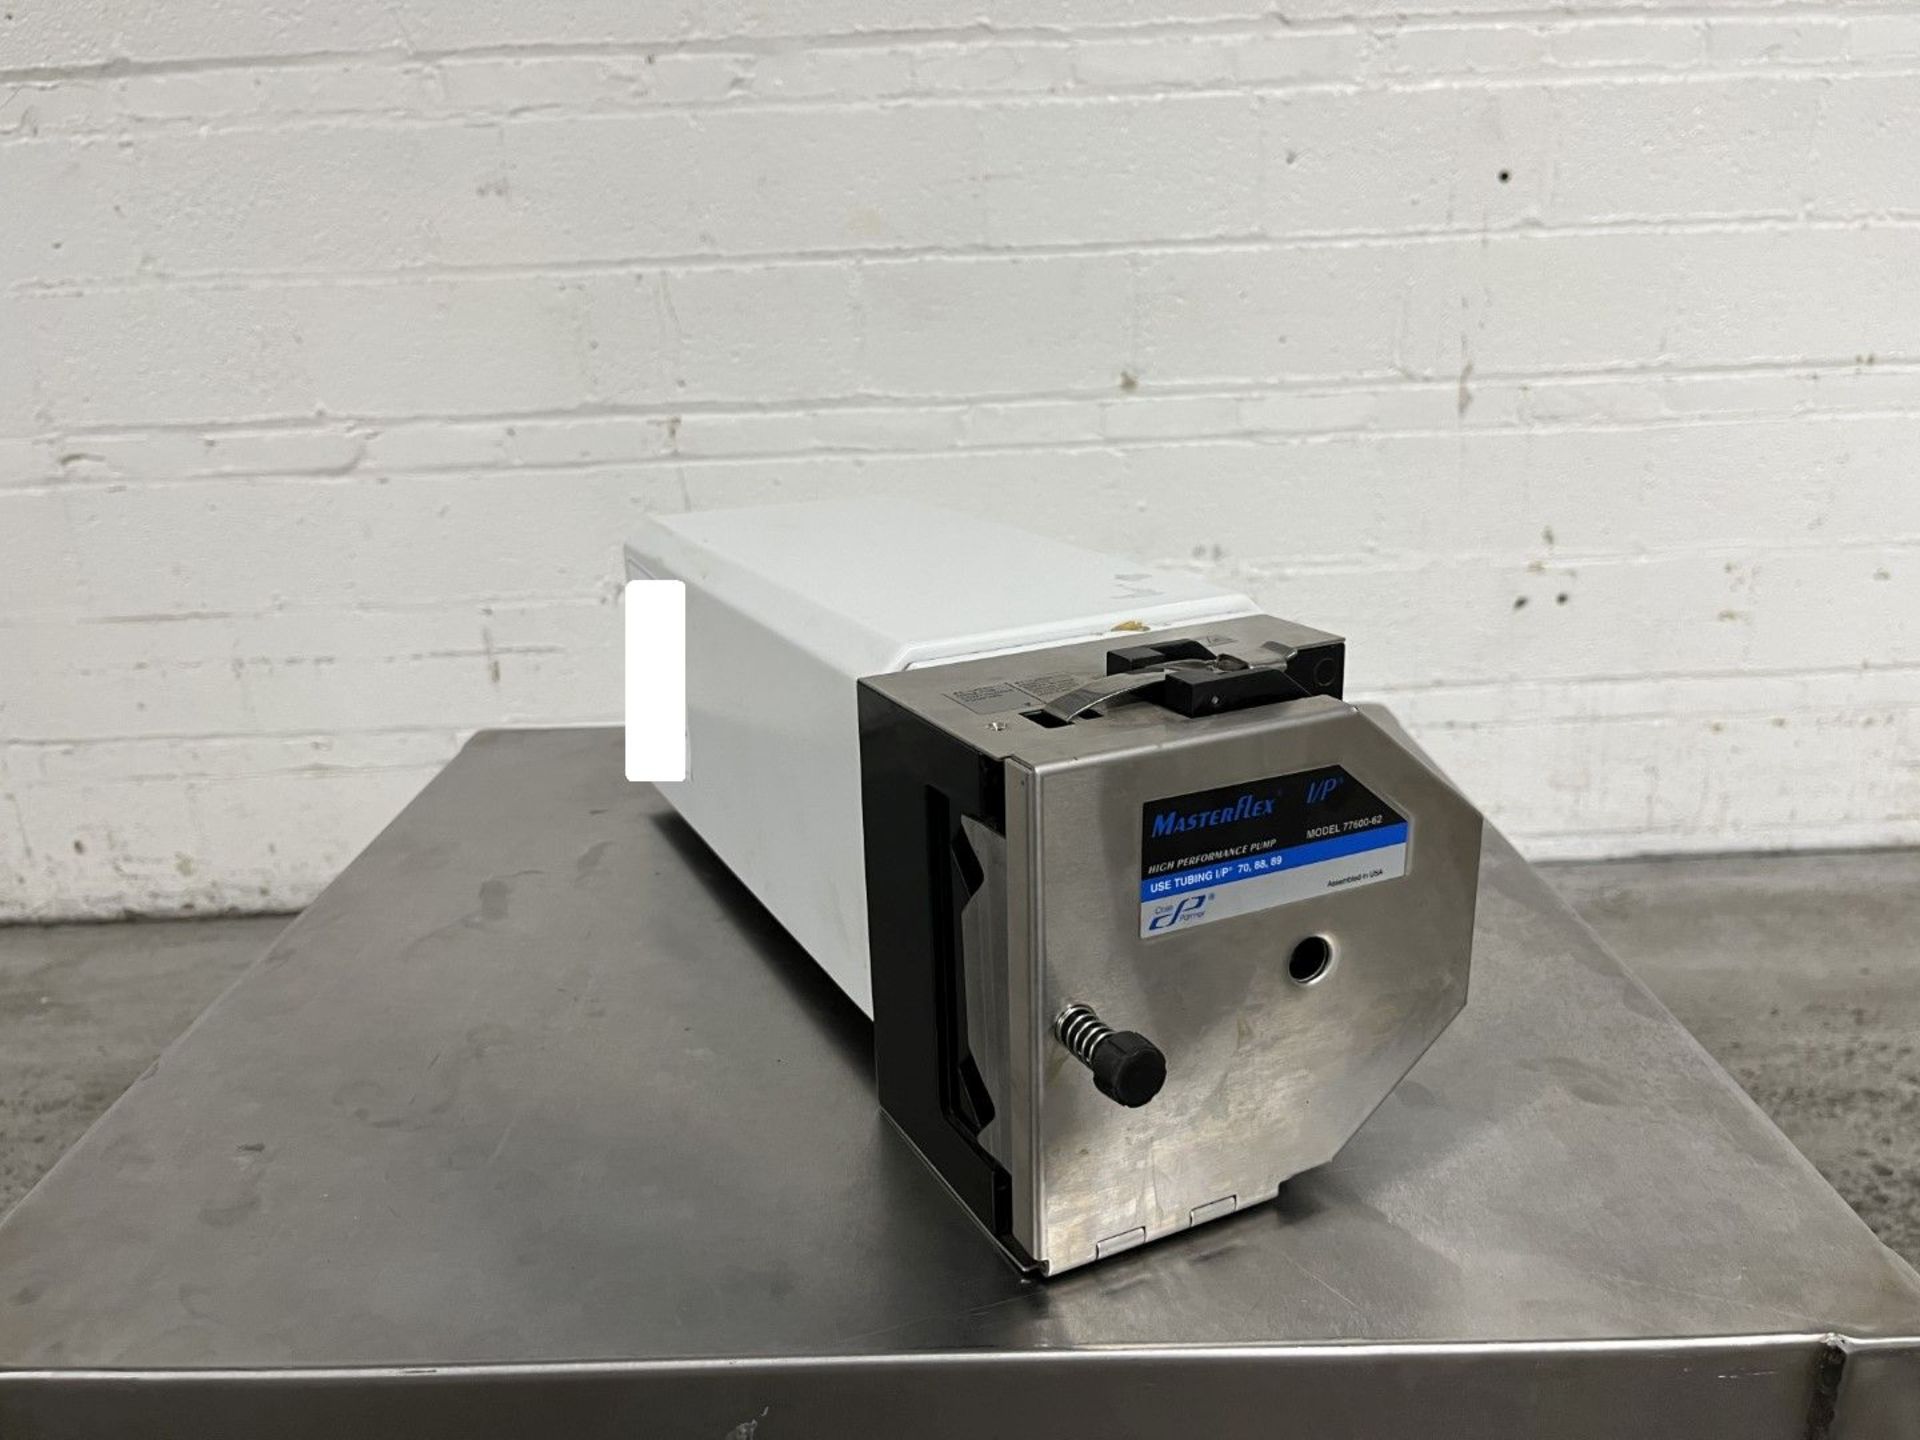 Cole-Parmer Masterflow peristaltic pump, model 77600-62, single head, with .34 hp drive, model